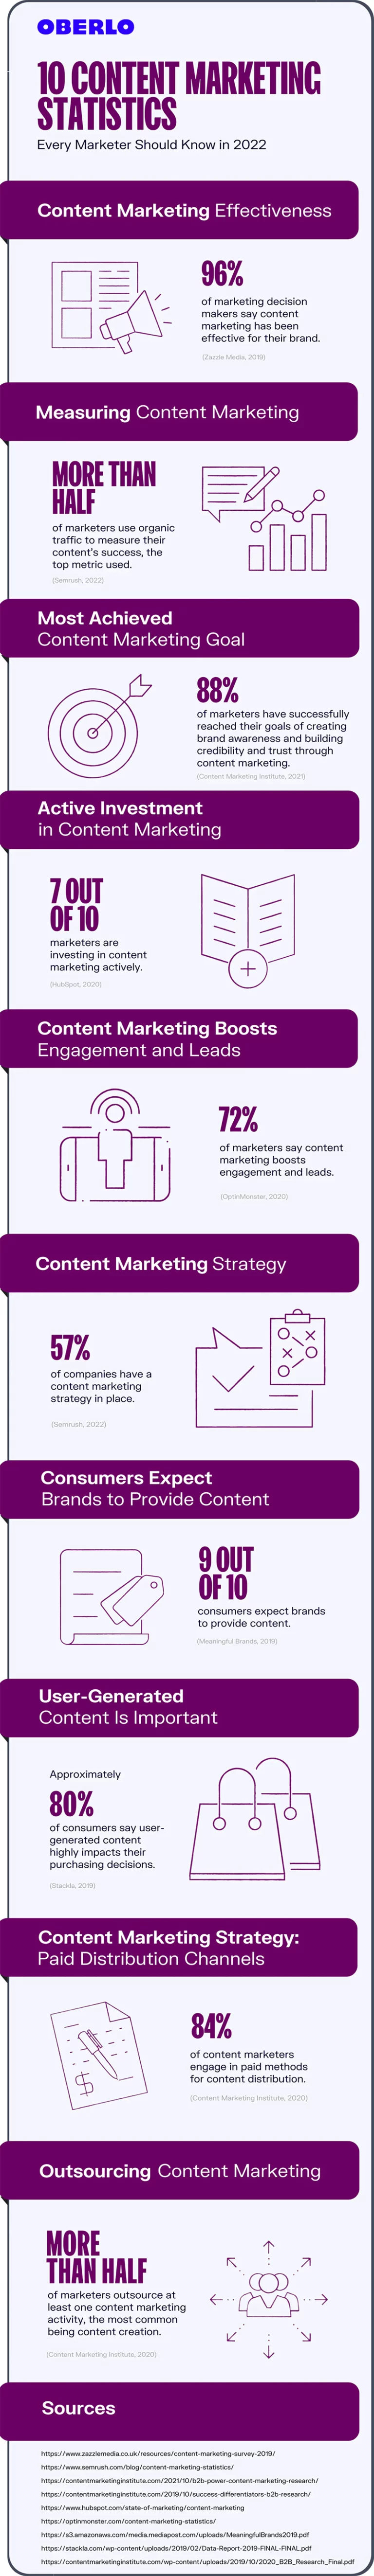 10 content stats infographic